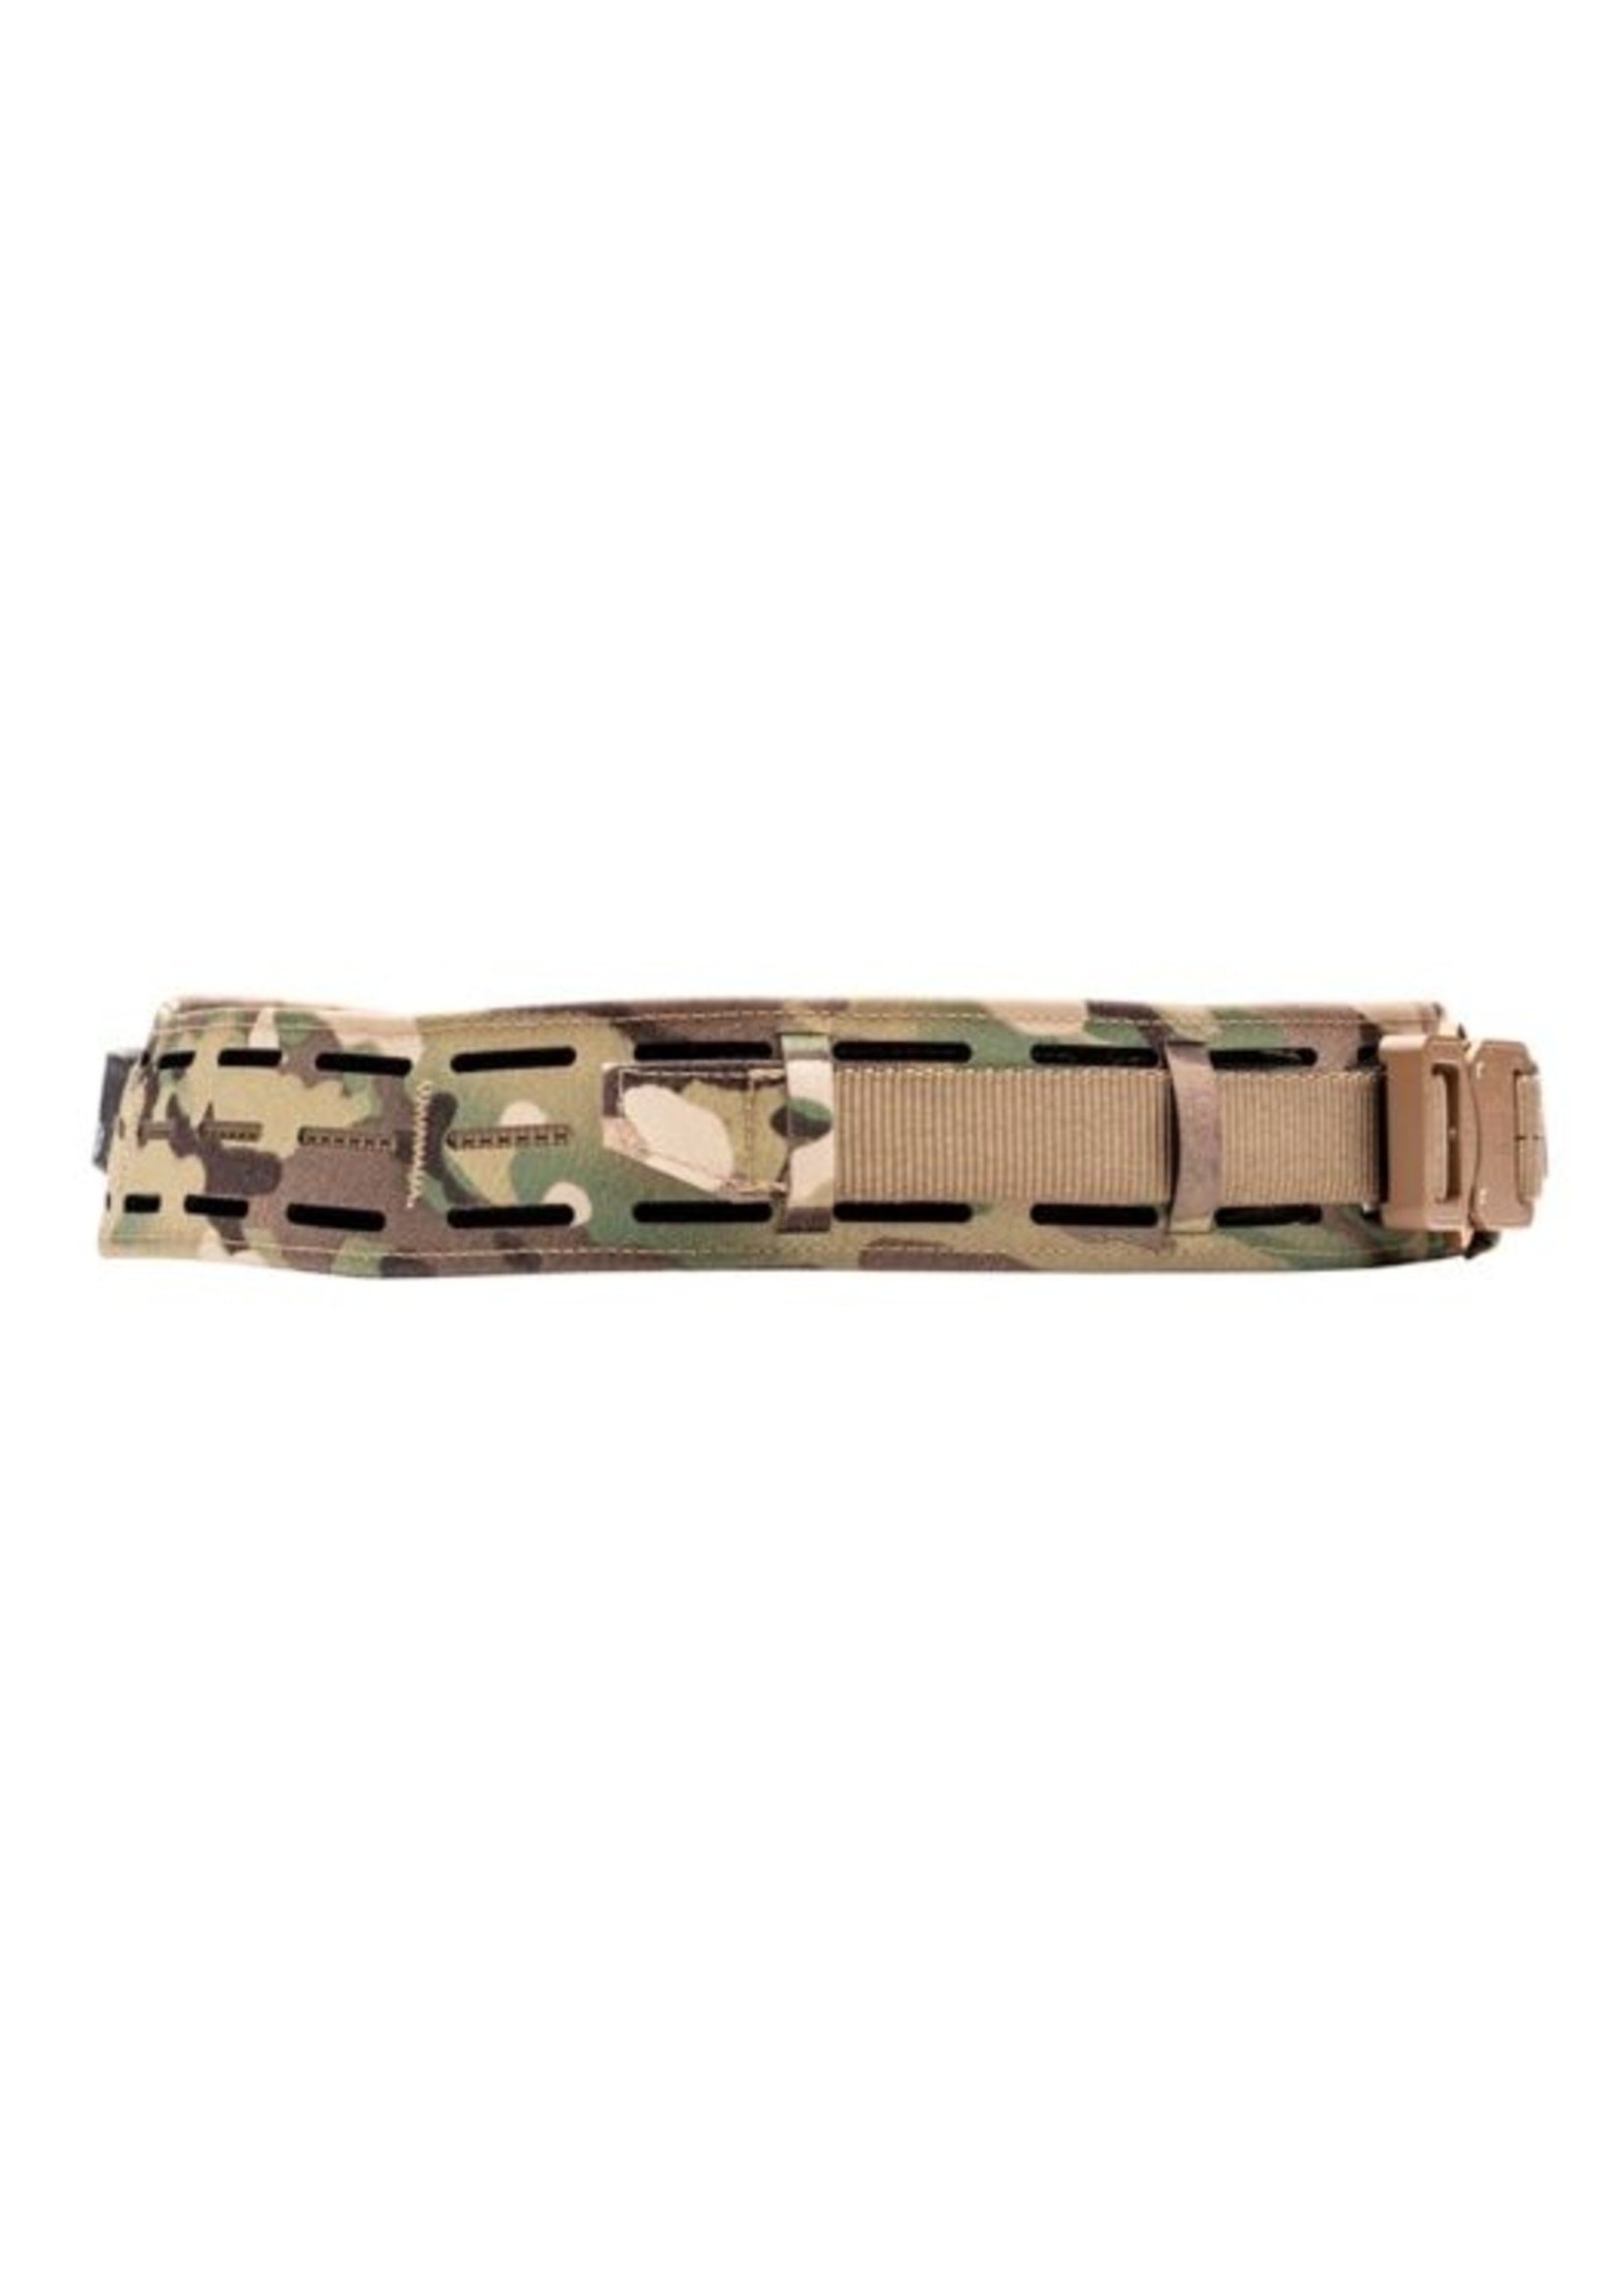 Tactical Belt With 9 Pouches Outdoor Utility Kit - GhillieSuitShop